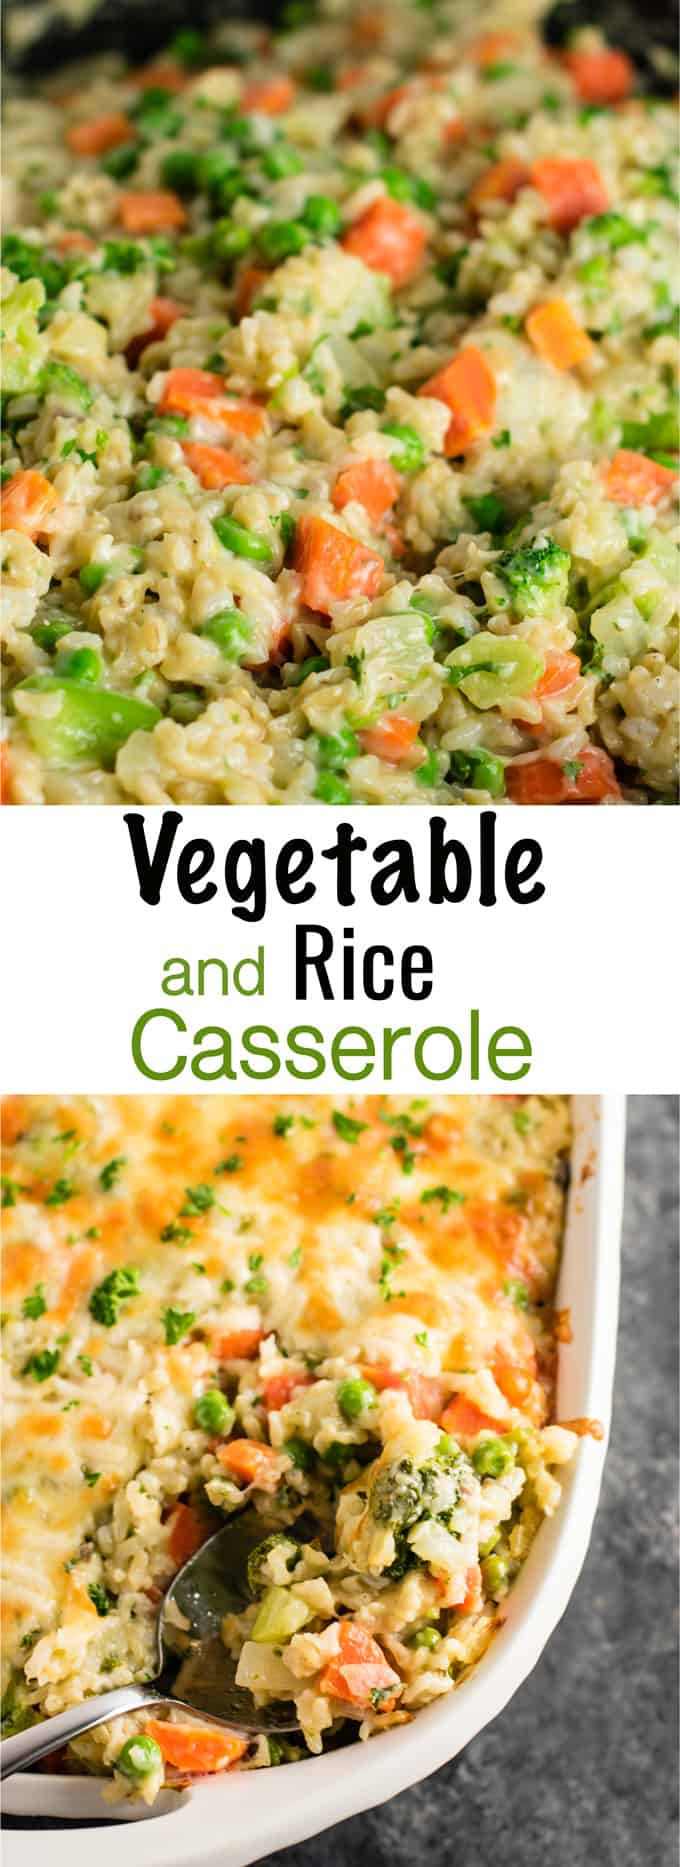 Vegetable Casserole Ideas
 Rice and Ve able Casserole Recipe with brown rice